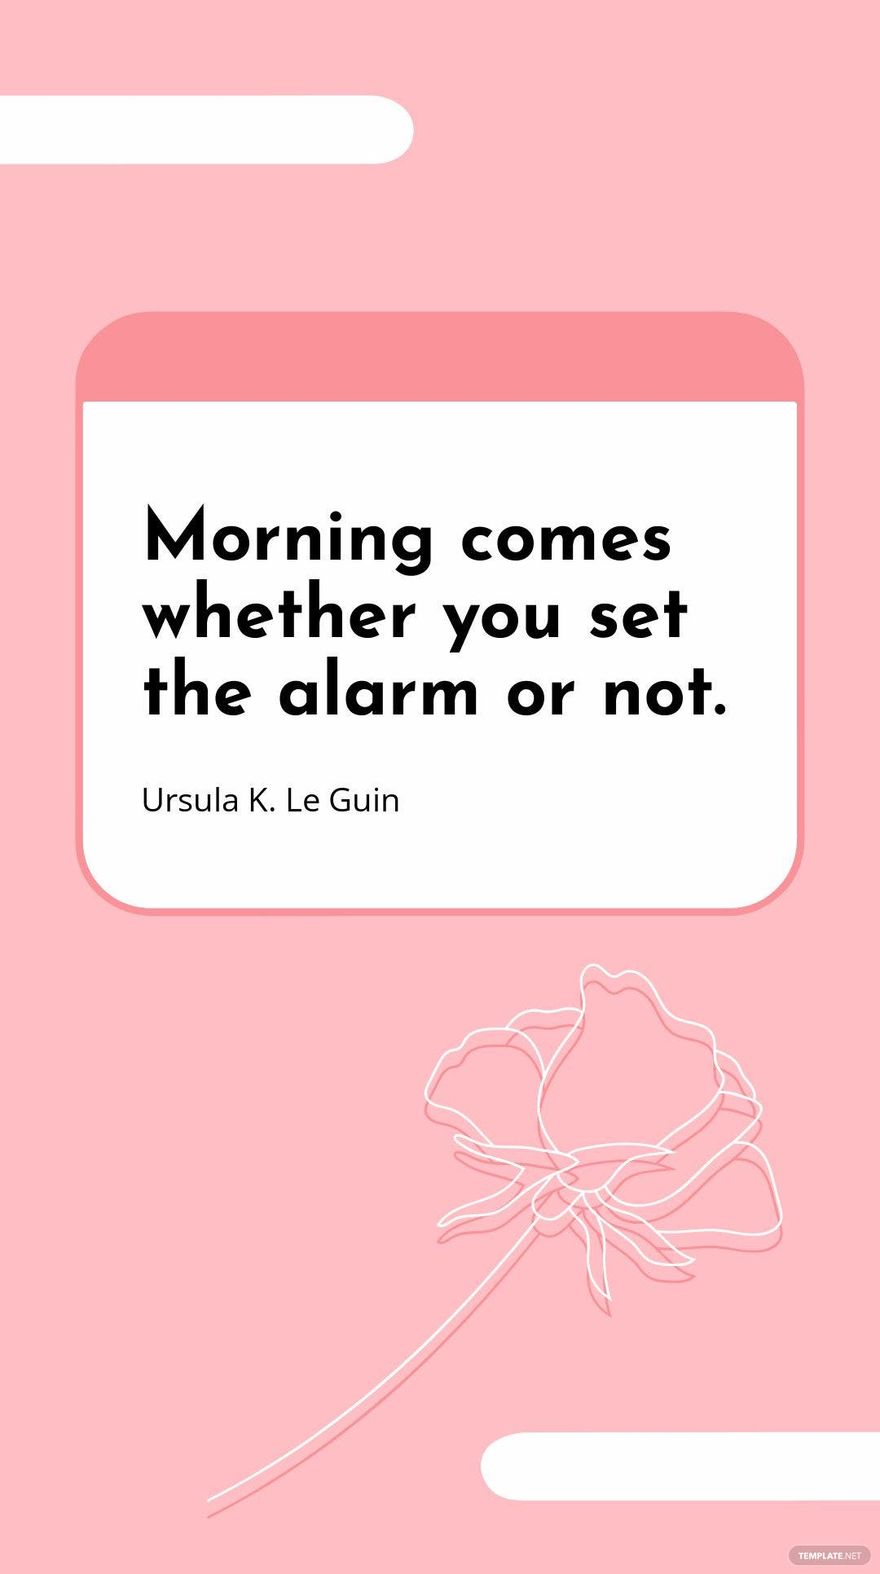 Ursula K. Le Guin - Morning comes whether you set the alarm or not.